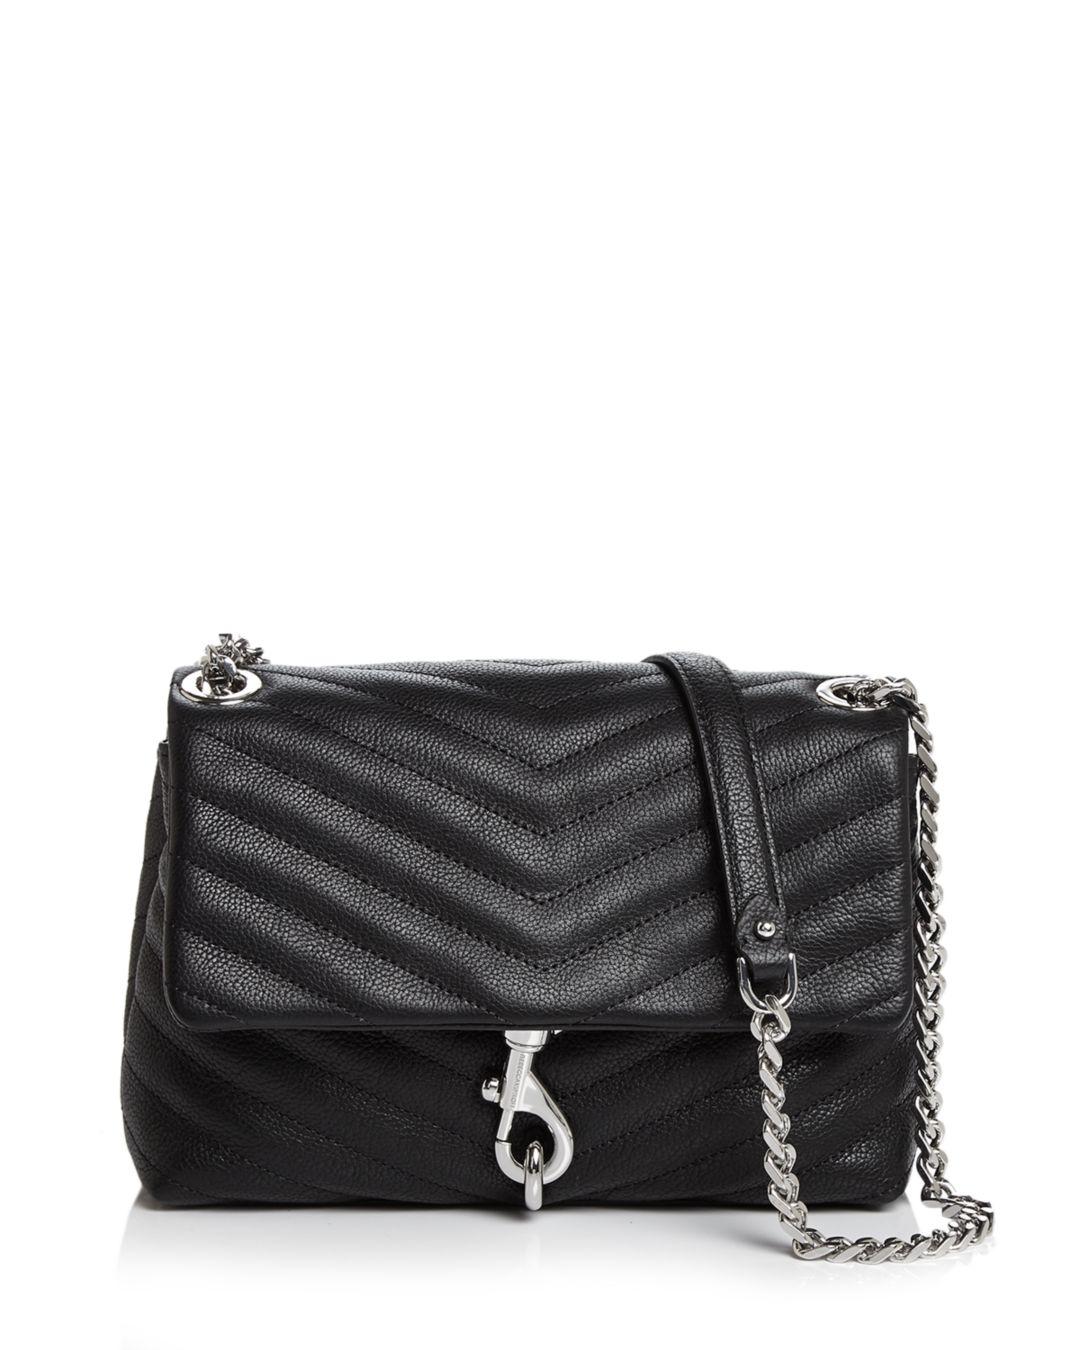 Rebecca Minkoff Edie Quilted Leather Convertible Crossbody in Black ...